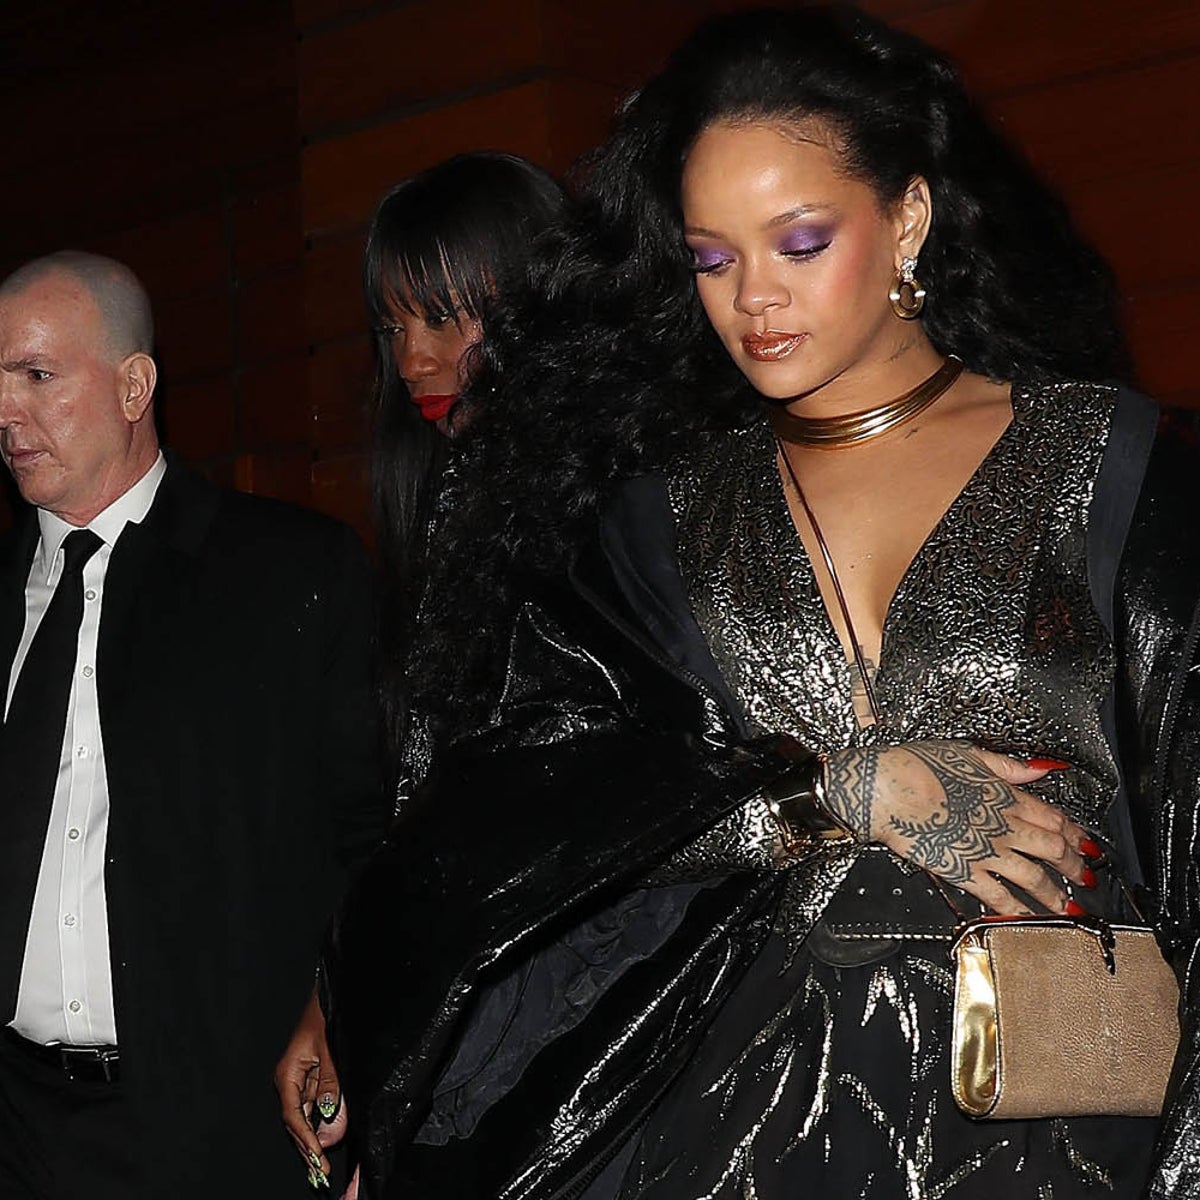 Rihanna Spotted in &#8216;I&#8217;m Retired&#8217; Shirt, Fueling Pregnancy Speculation in NYC Outing